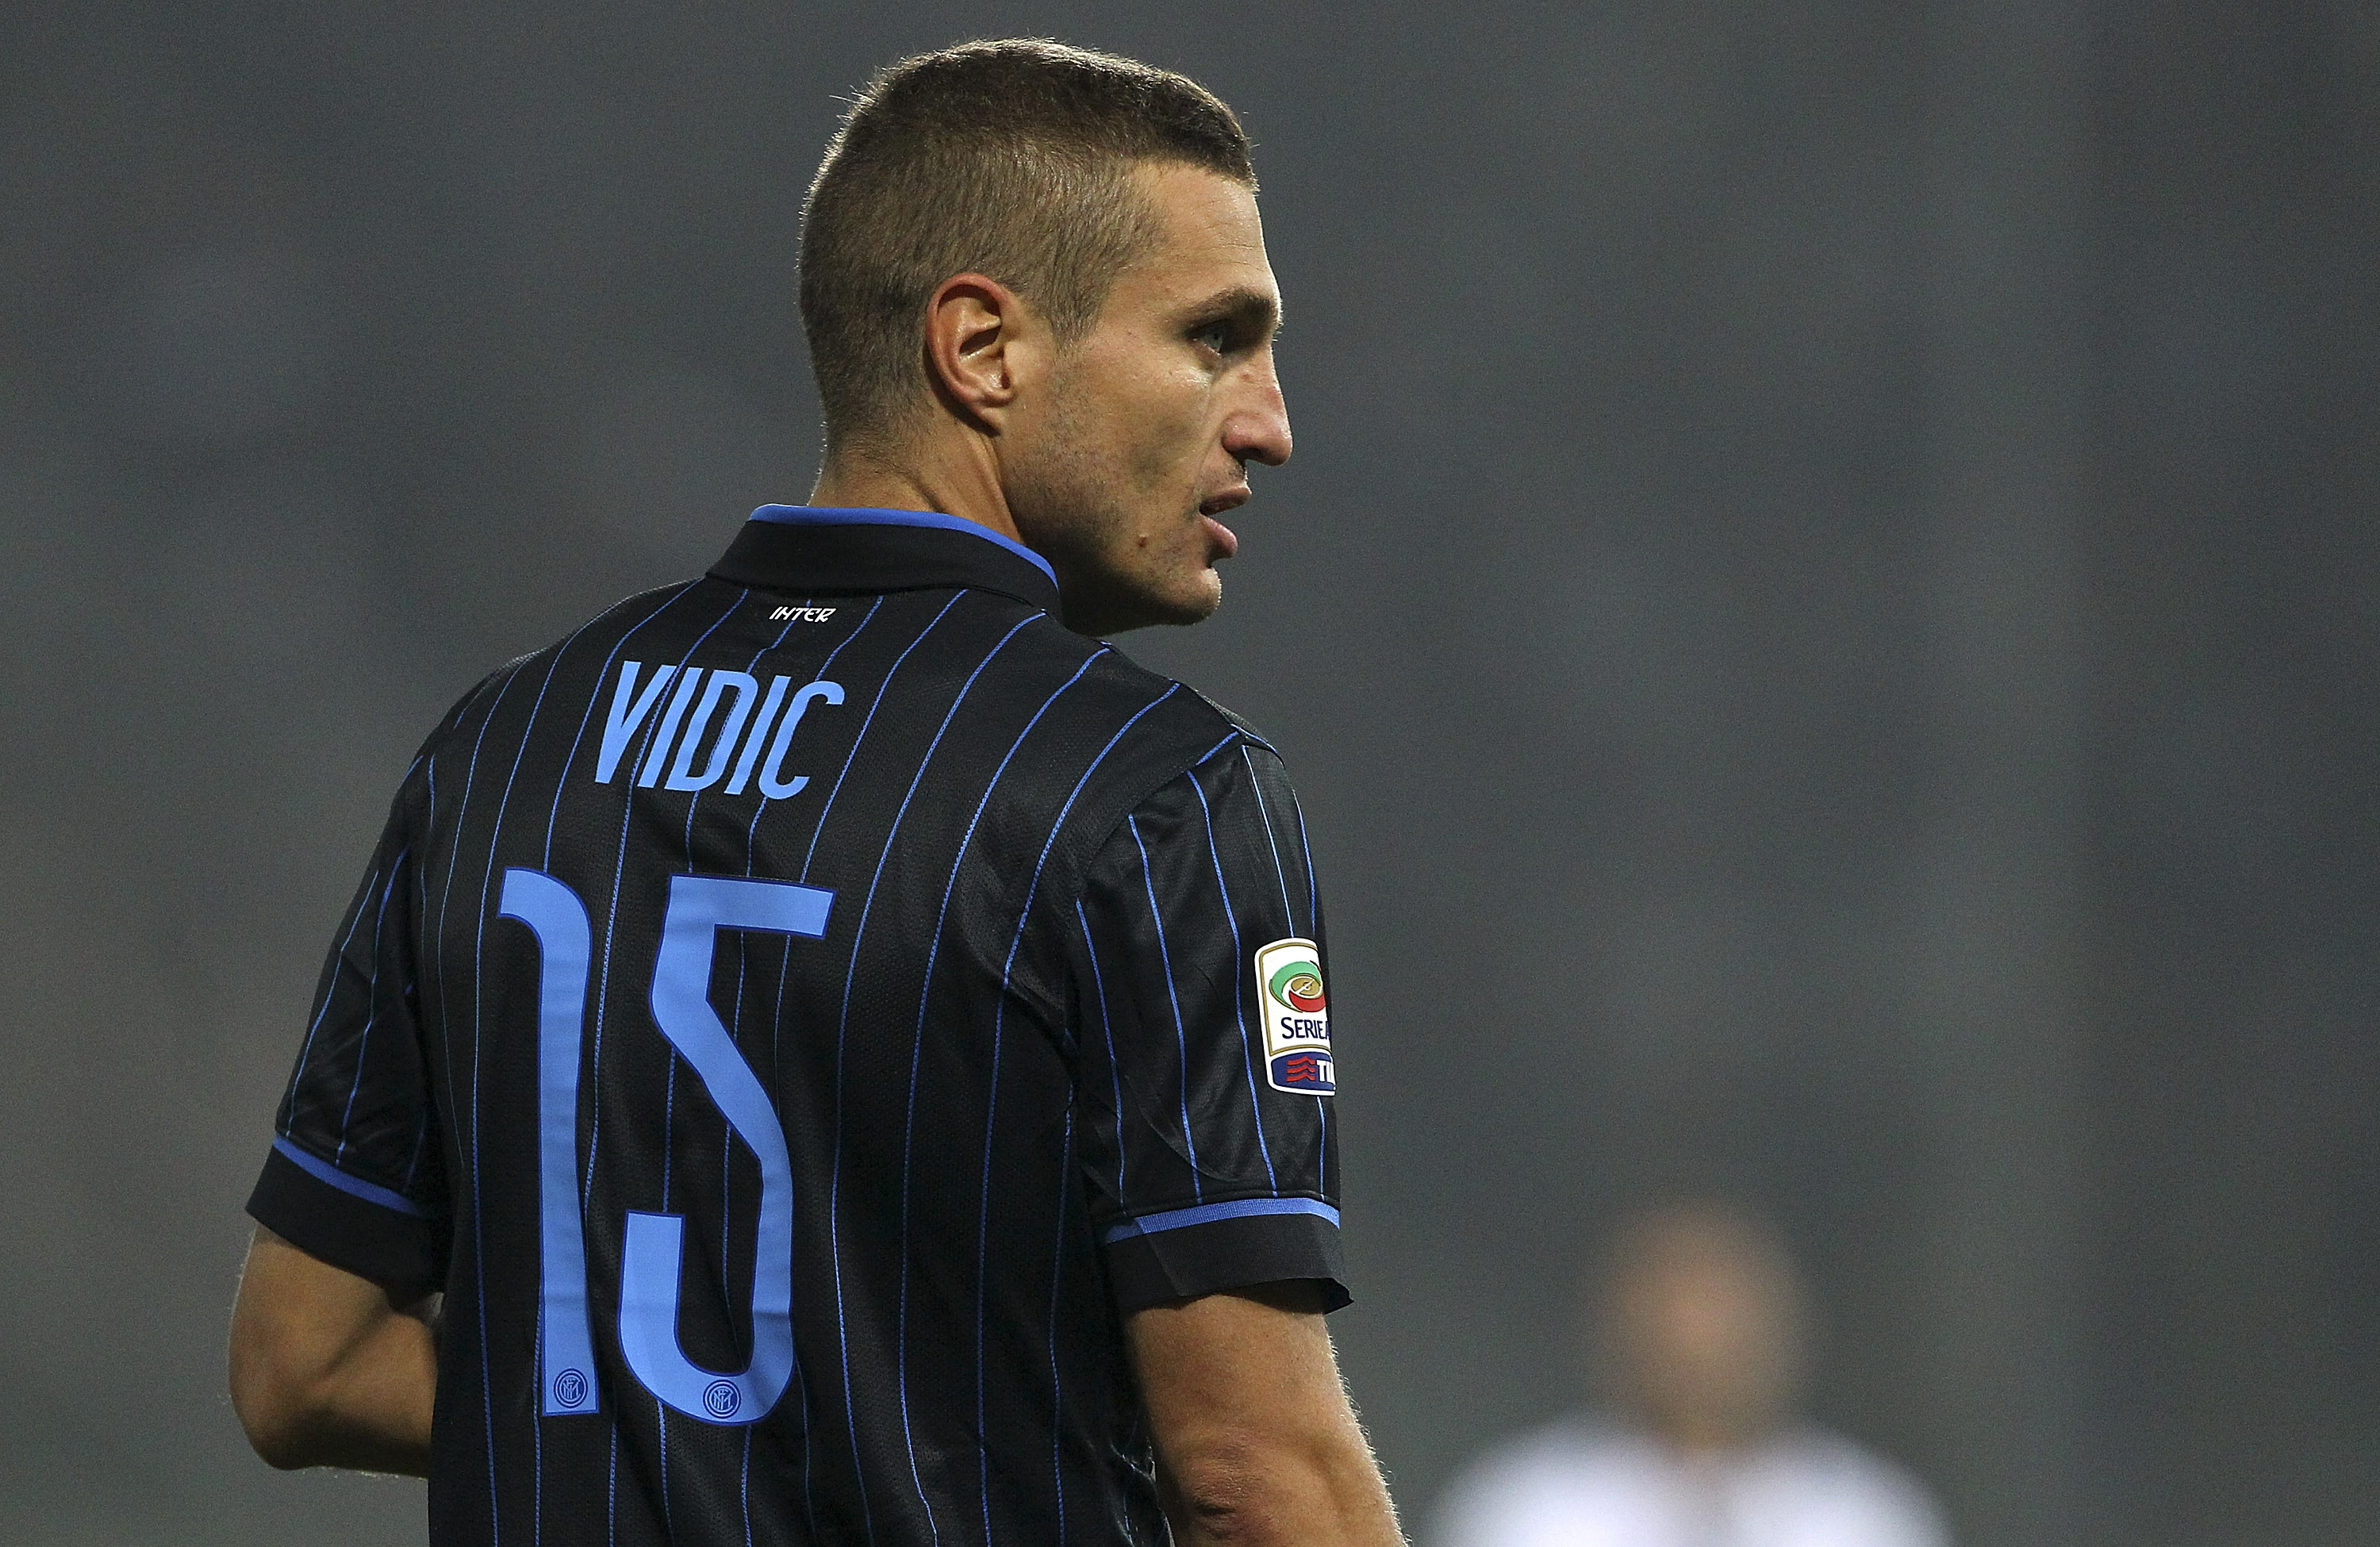 Agent: Vidic will not move from Inter